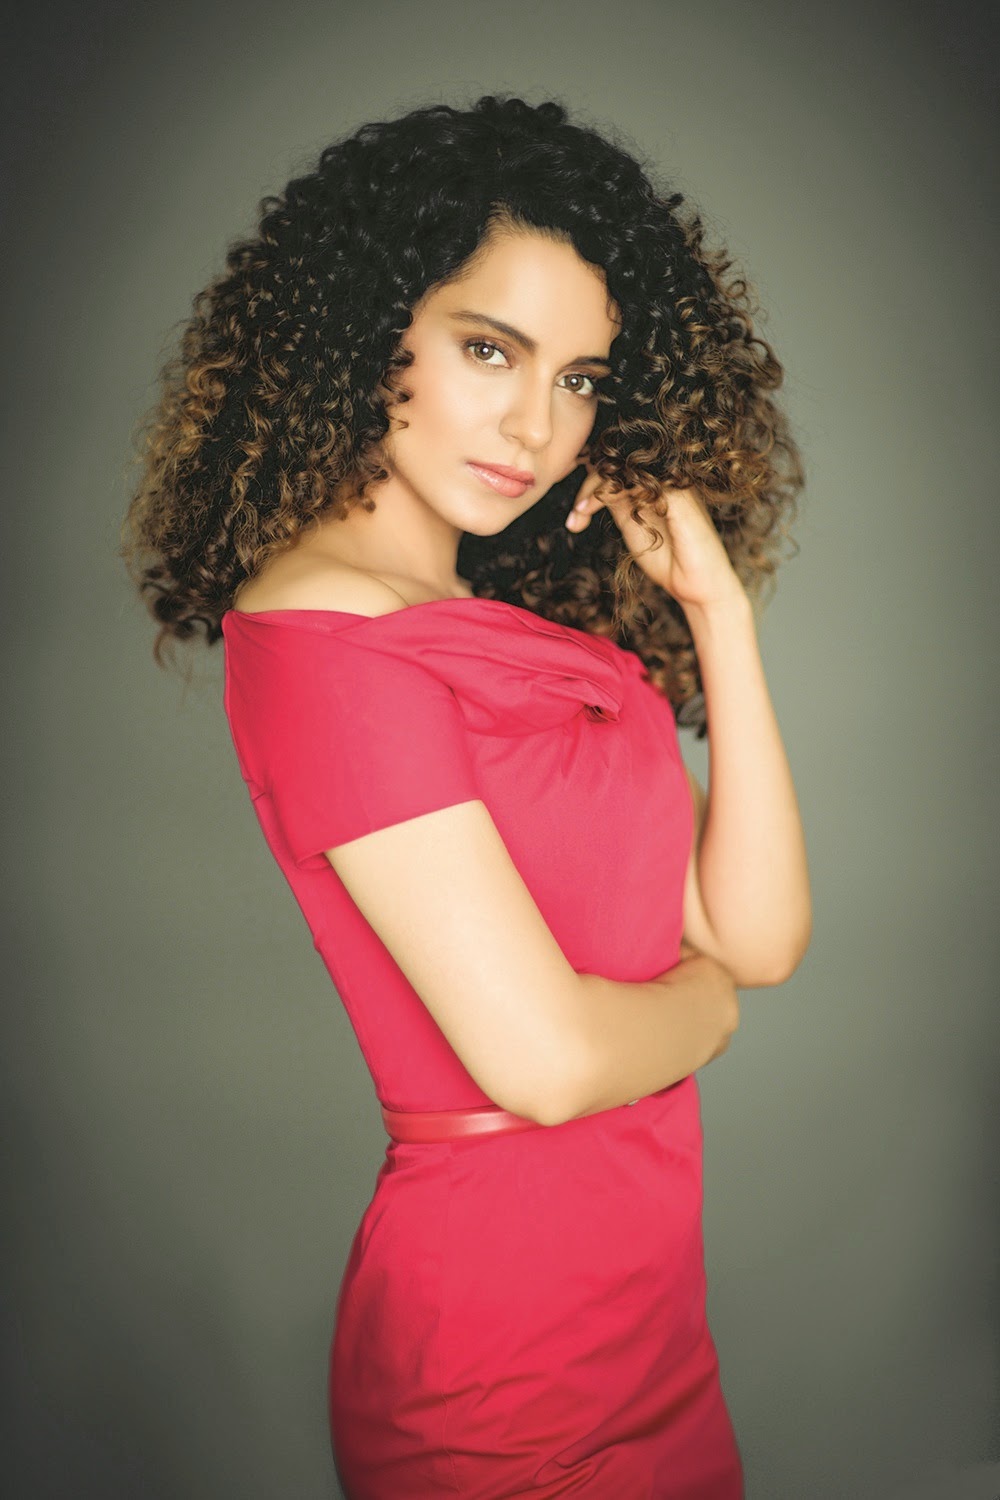 High Quality Bollywood Celebrity Pictures Kangana Ranaut